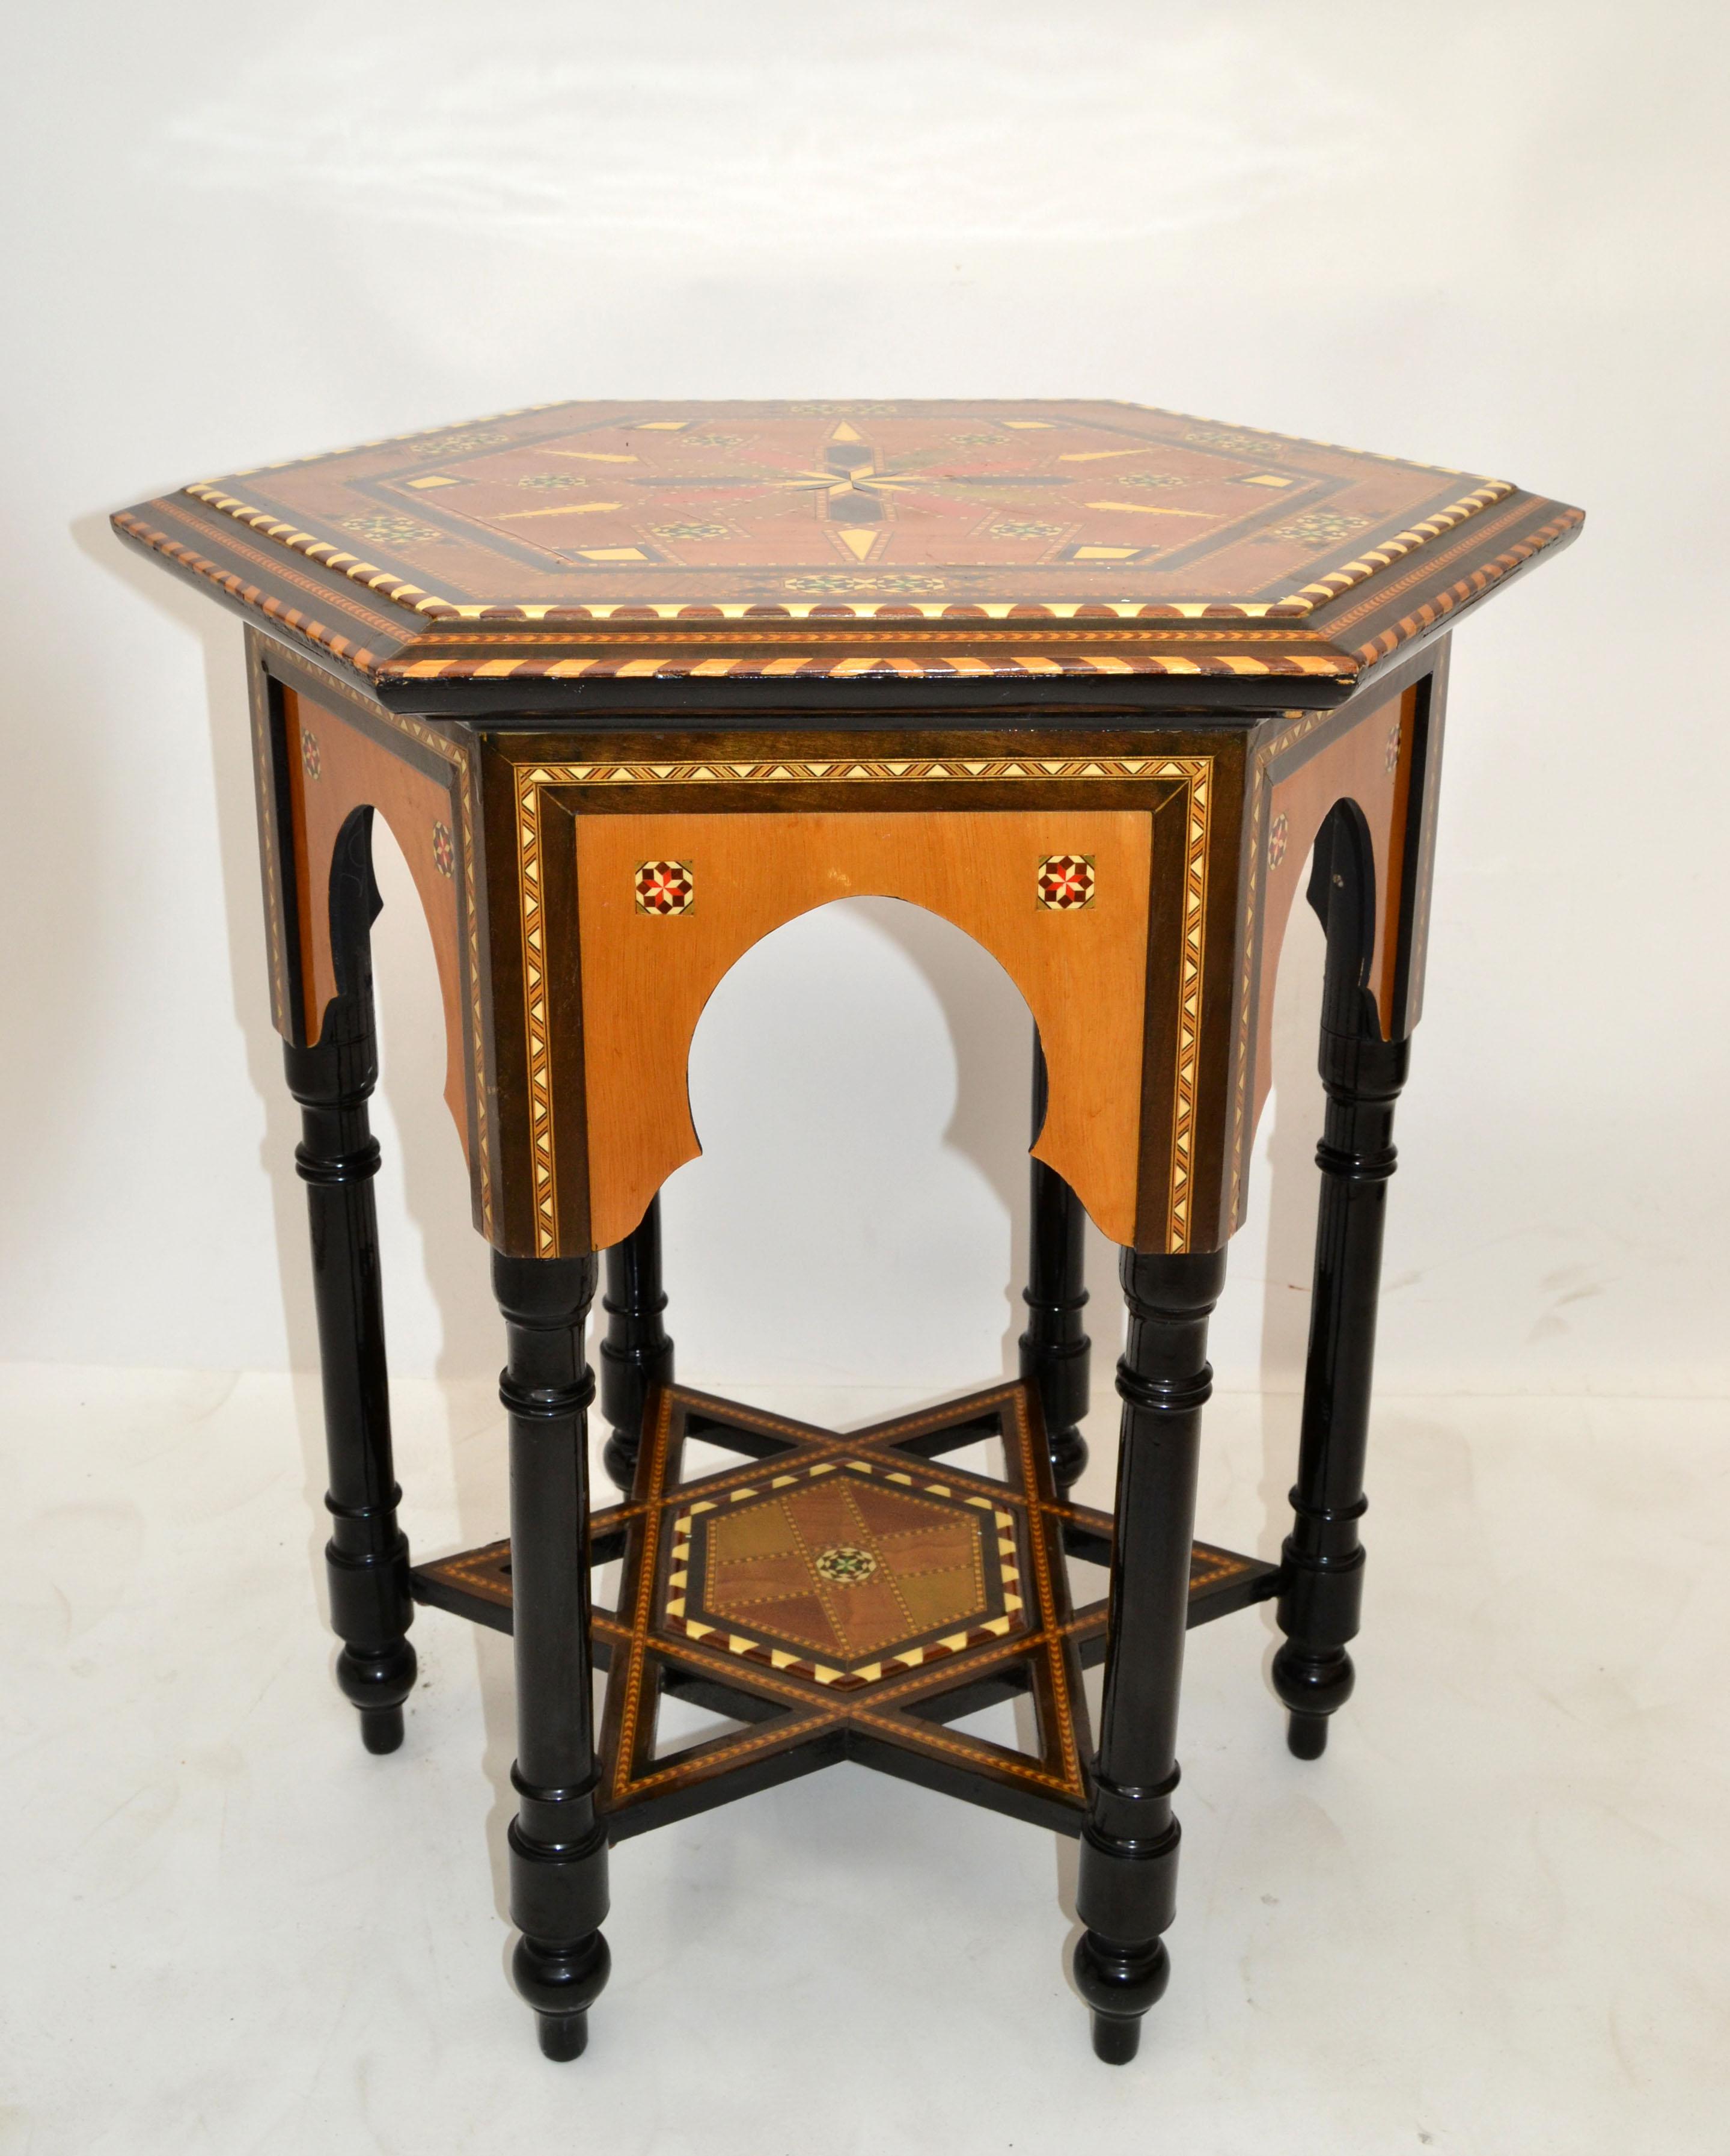 Hand-Crafted Hexagonal Wood Marquetry Moroccan Handmade Center Table Fruitwood Midcentury For Sale